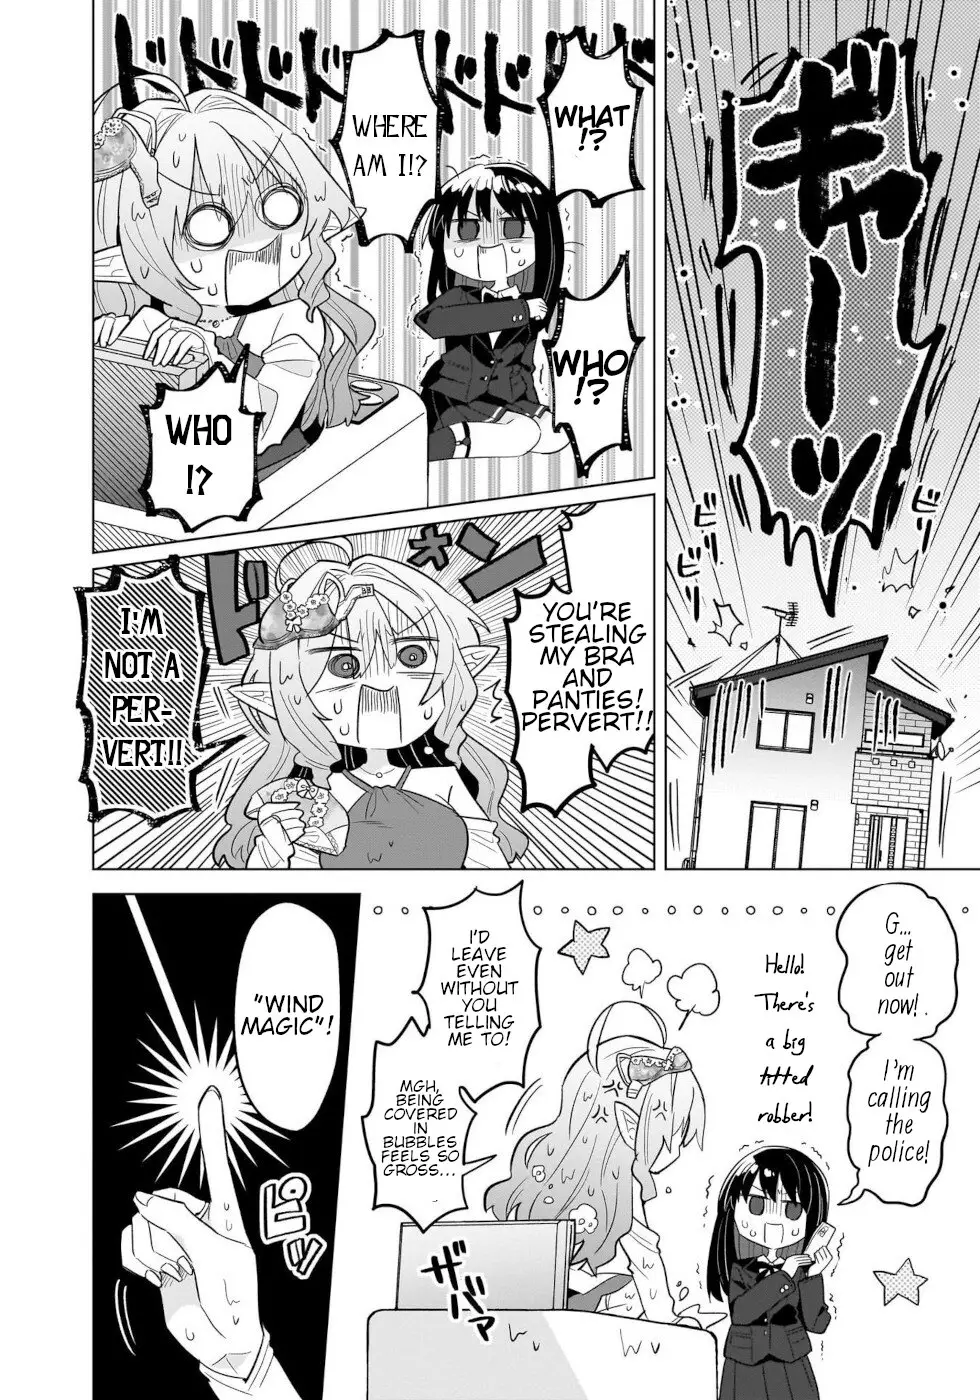 Sweets, Elf, And A High School Girl - 1 page 13-15f663d4